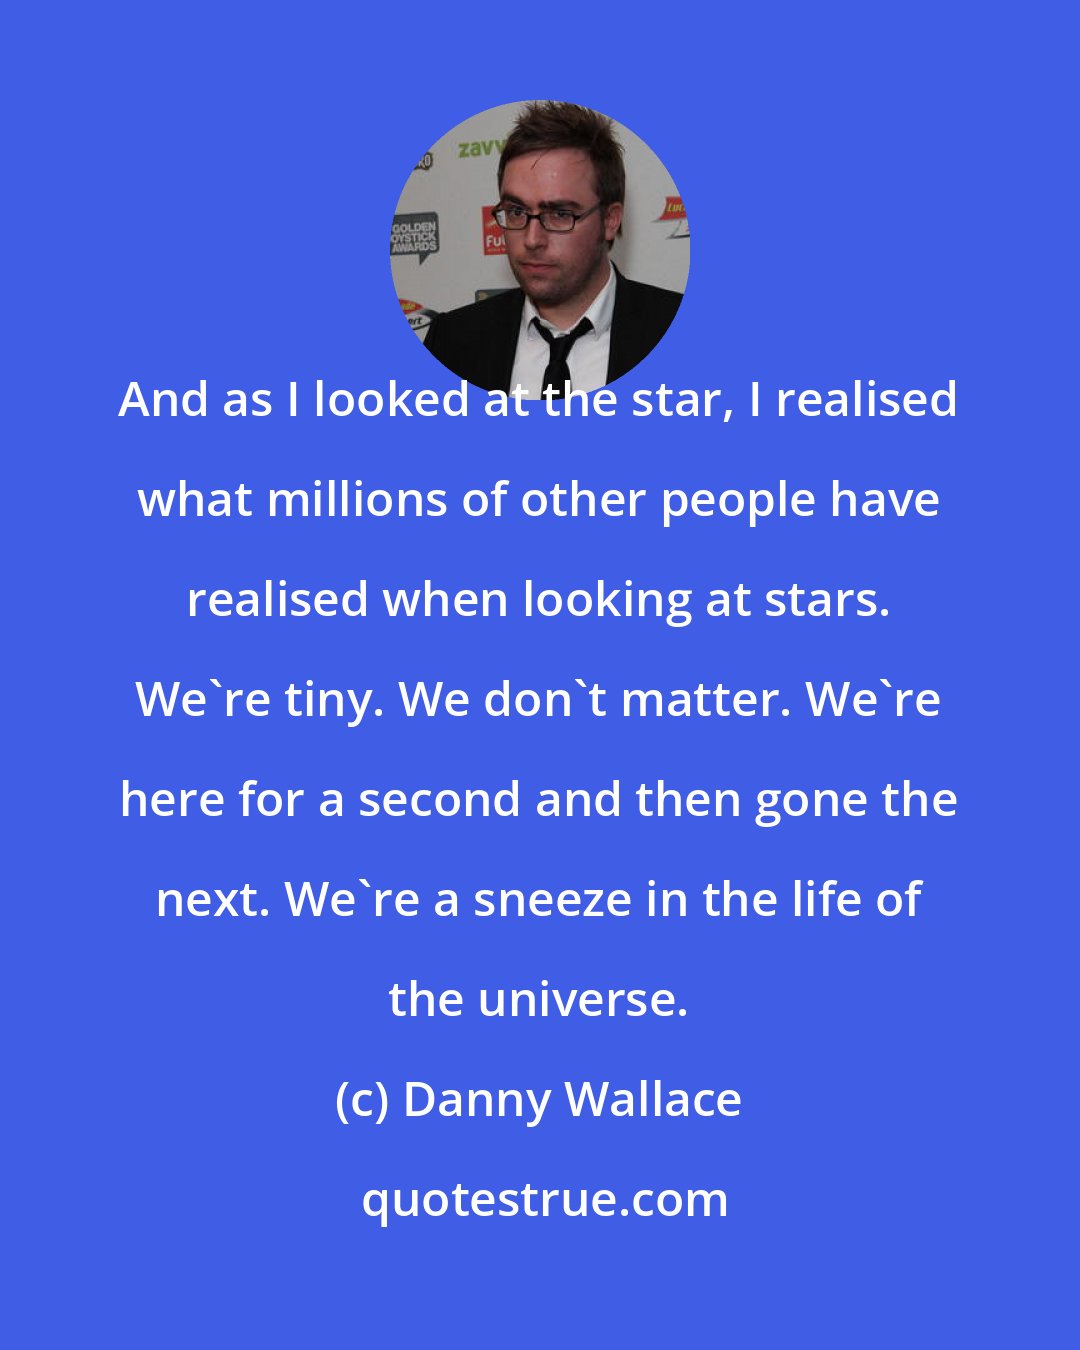 Danny Wallace: And as I looked at the star, I realised what millions of other people have realised when looking at stars. We're tiny. We don't matter. We're here for a second and then gone the next. We're a sneeze in the life of the universe.